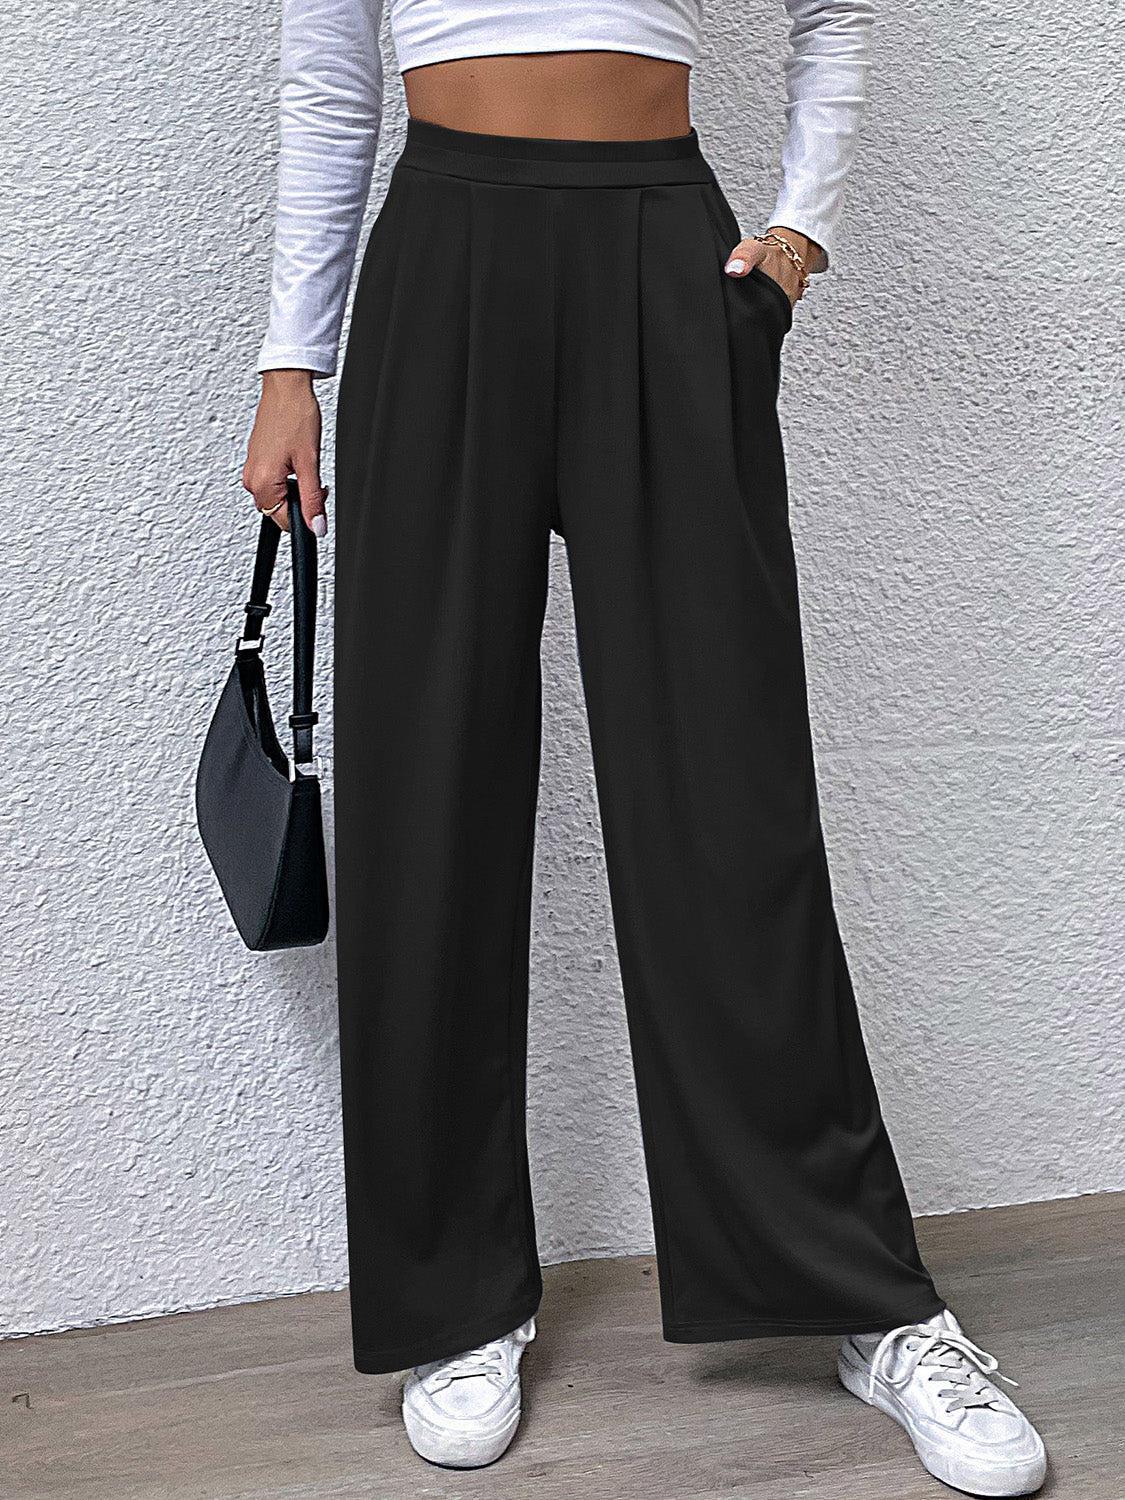 a woman in a white top and black pants